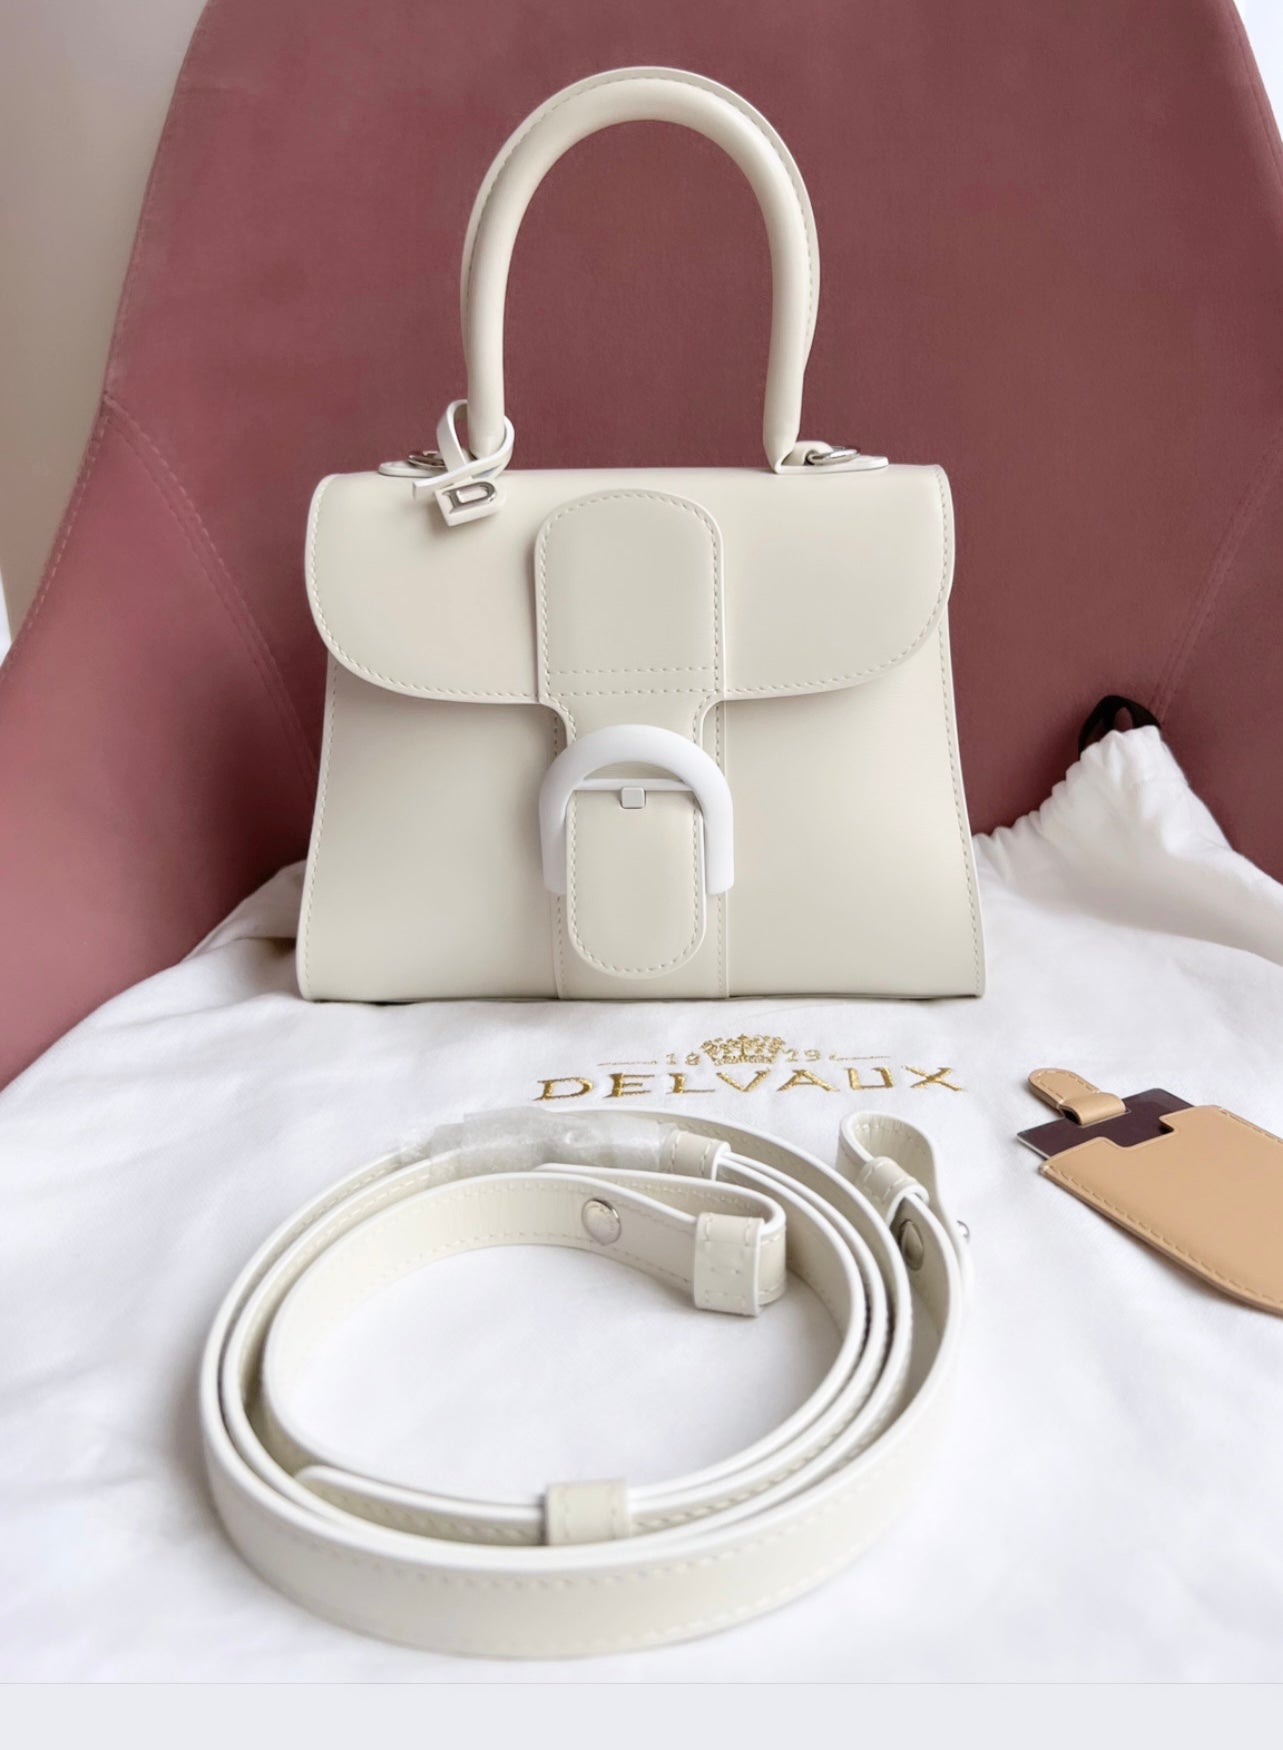 Delvaux - Authenticated Brillant Handbag - for Women, Very Good Condition